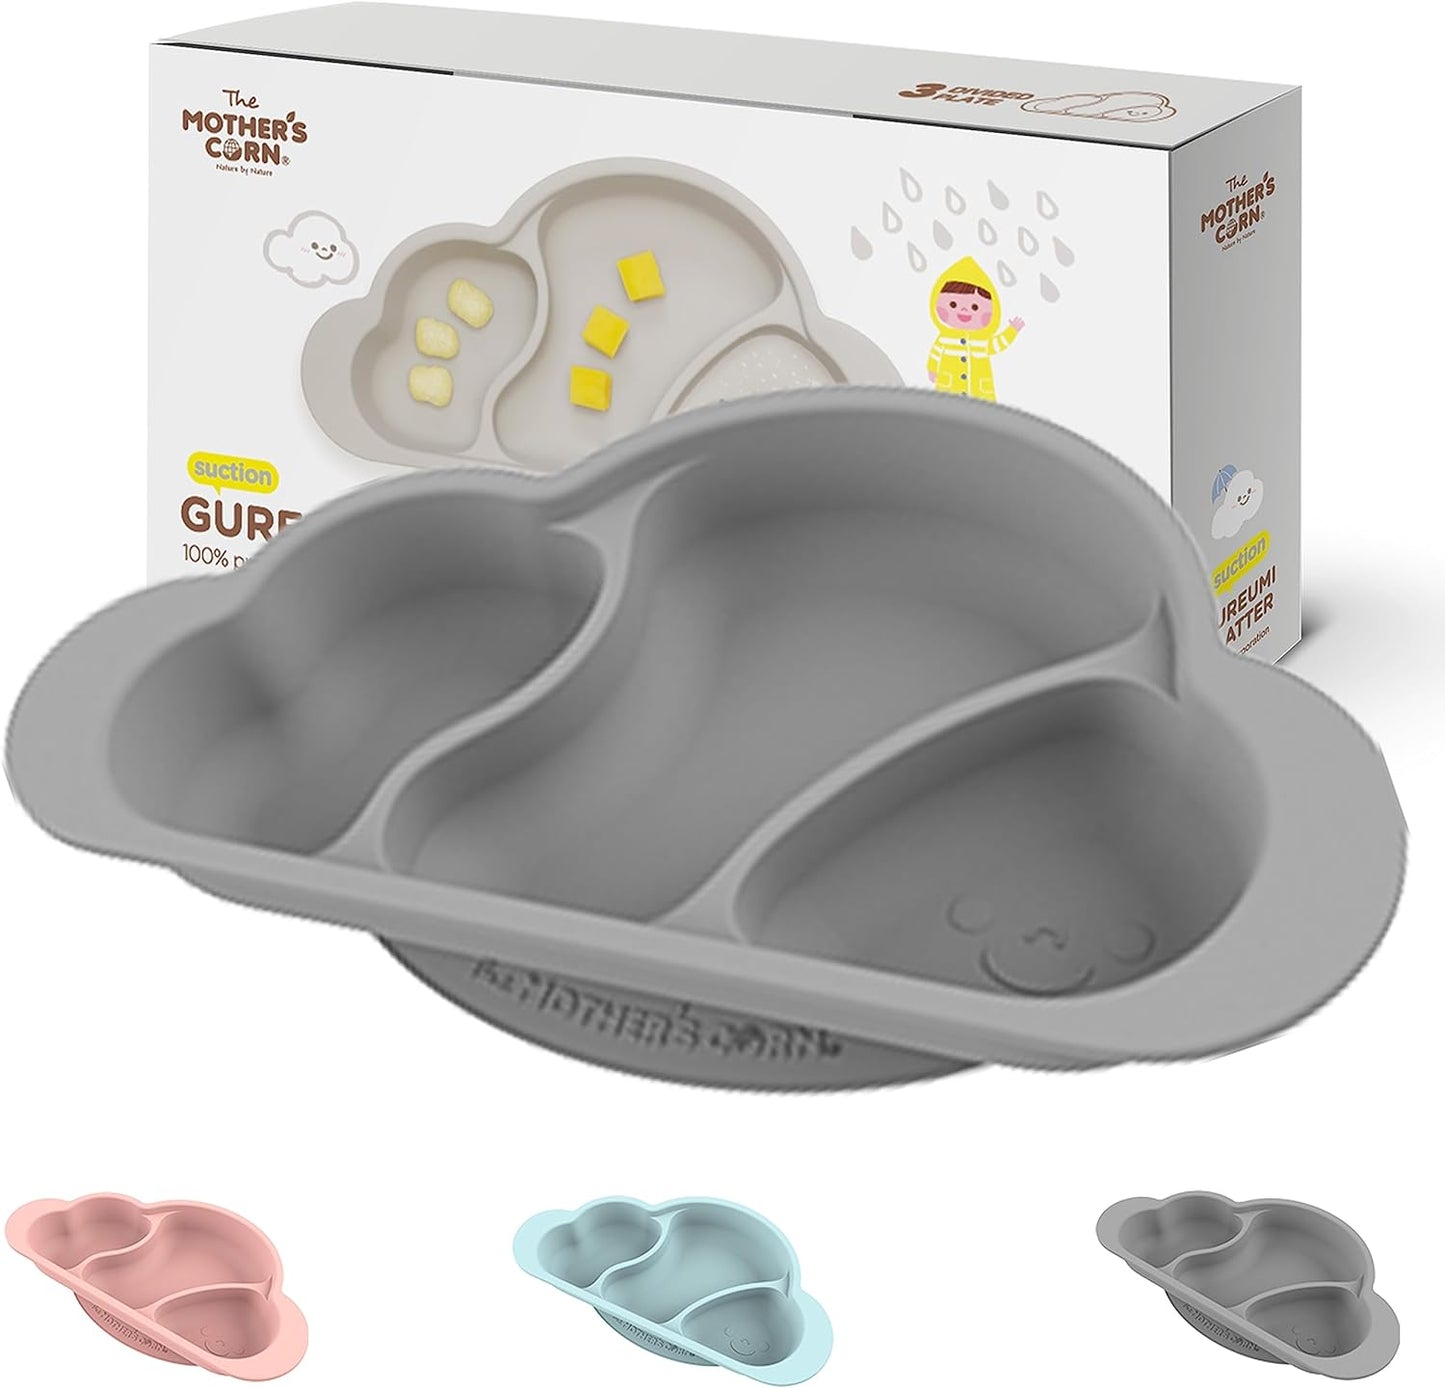 Mother's Corn Gureumi Three Division Suction Platter - Gray Color